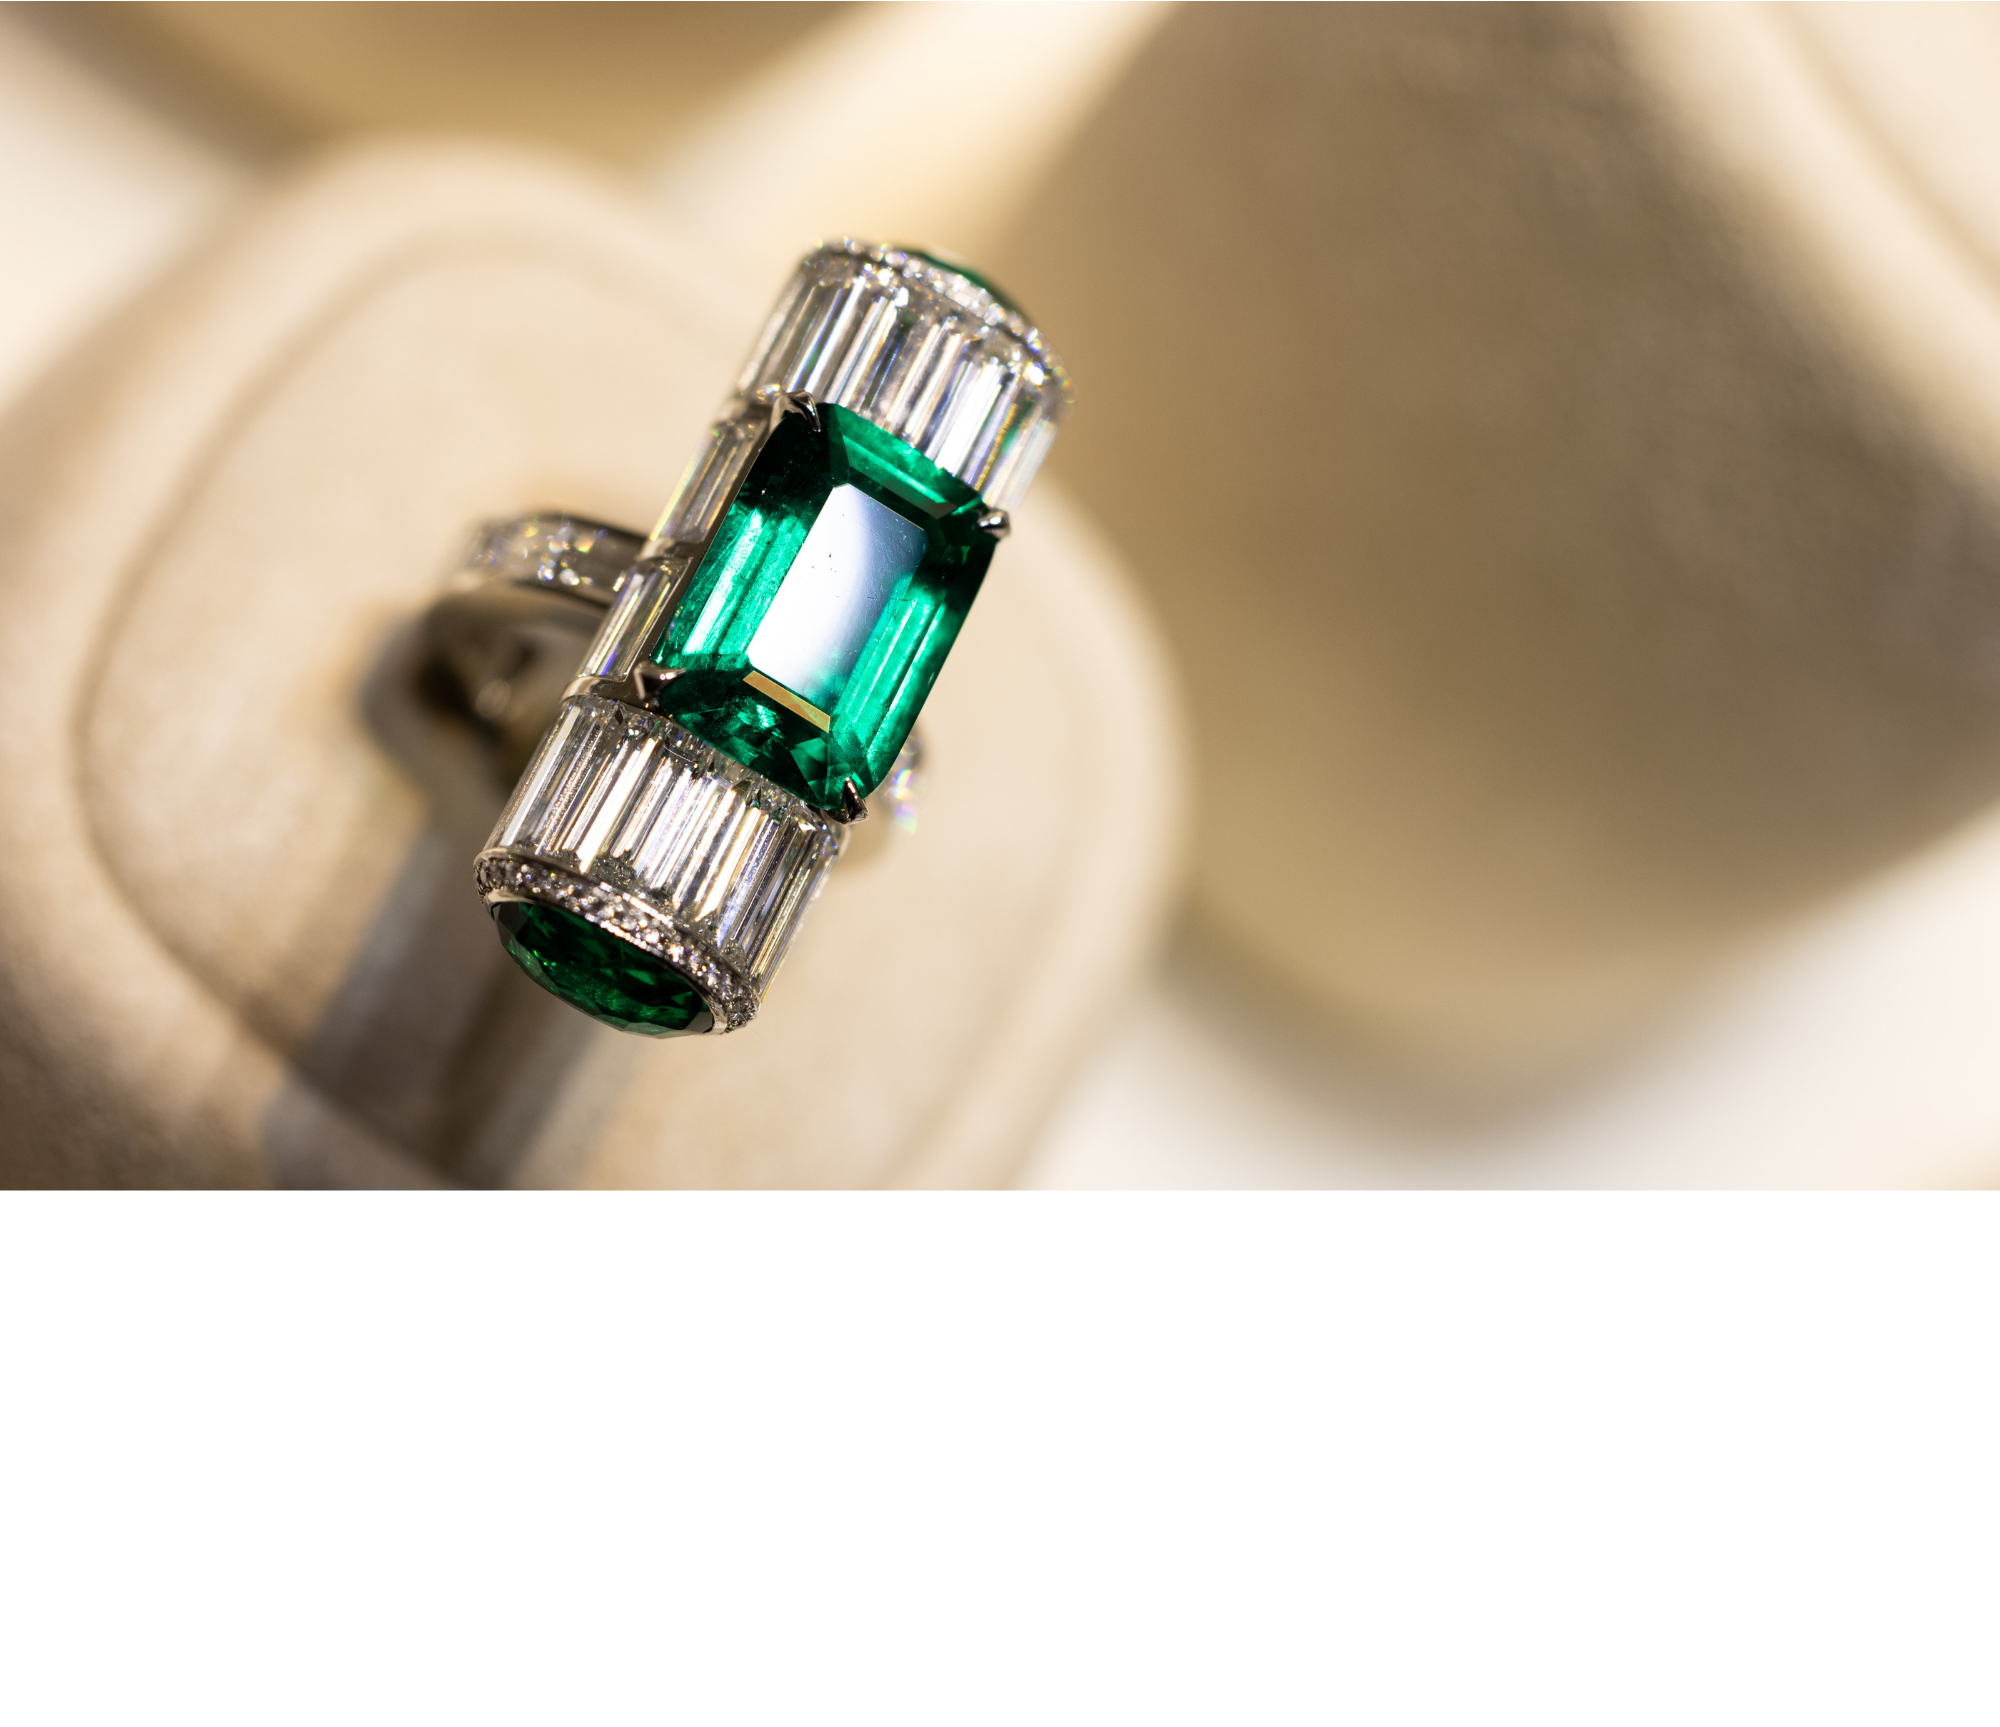 Emerald ring coming soon to Cicada 